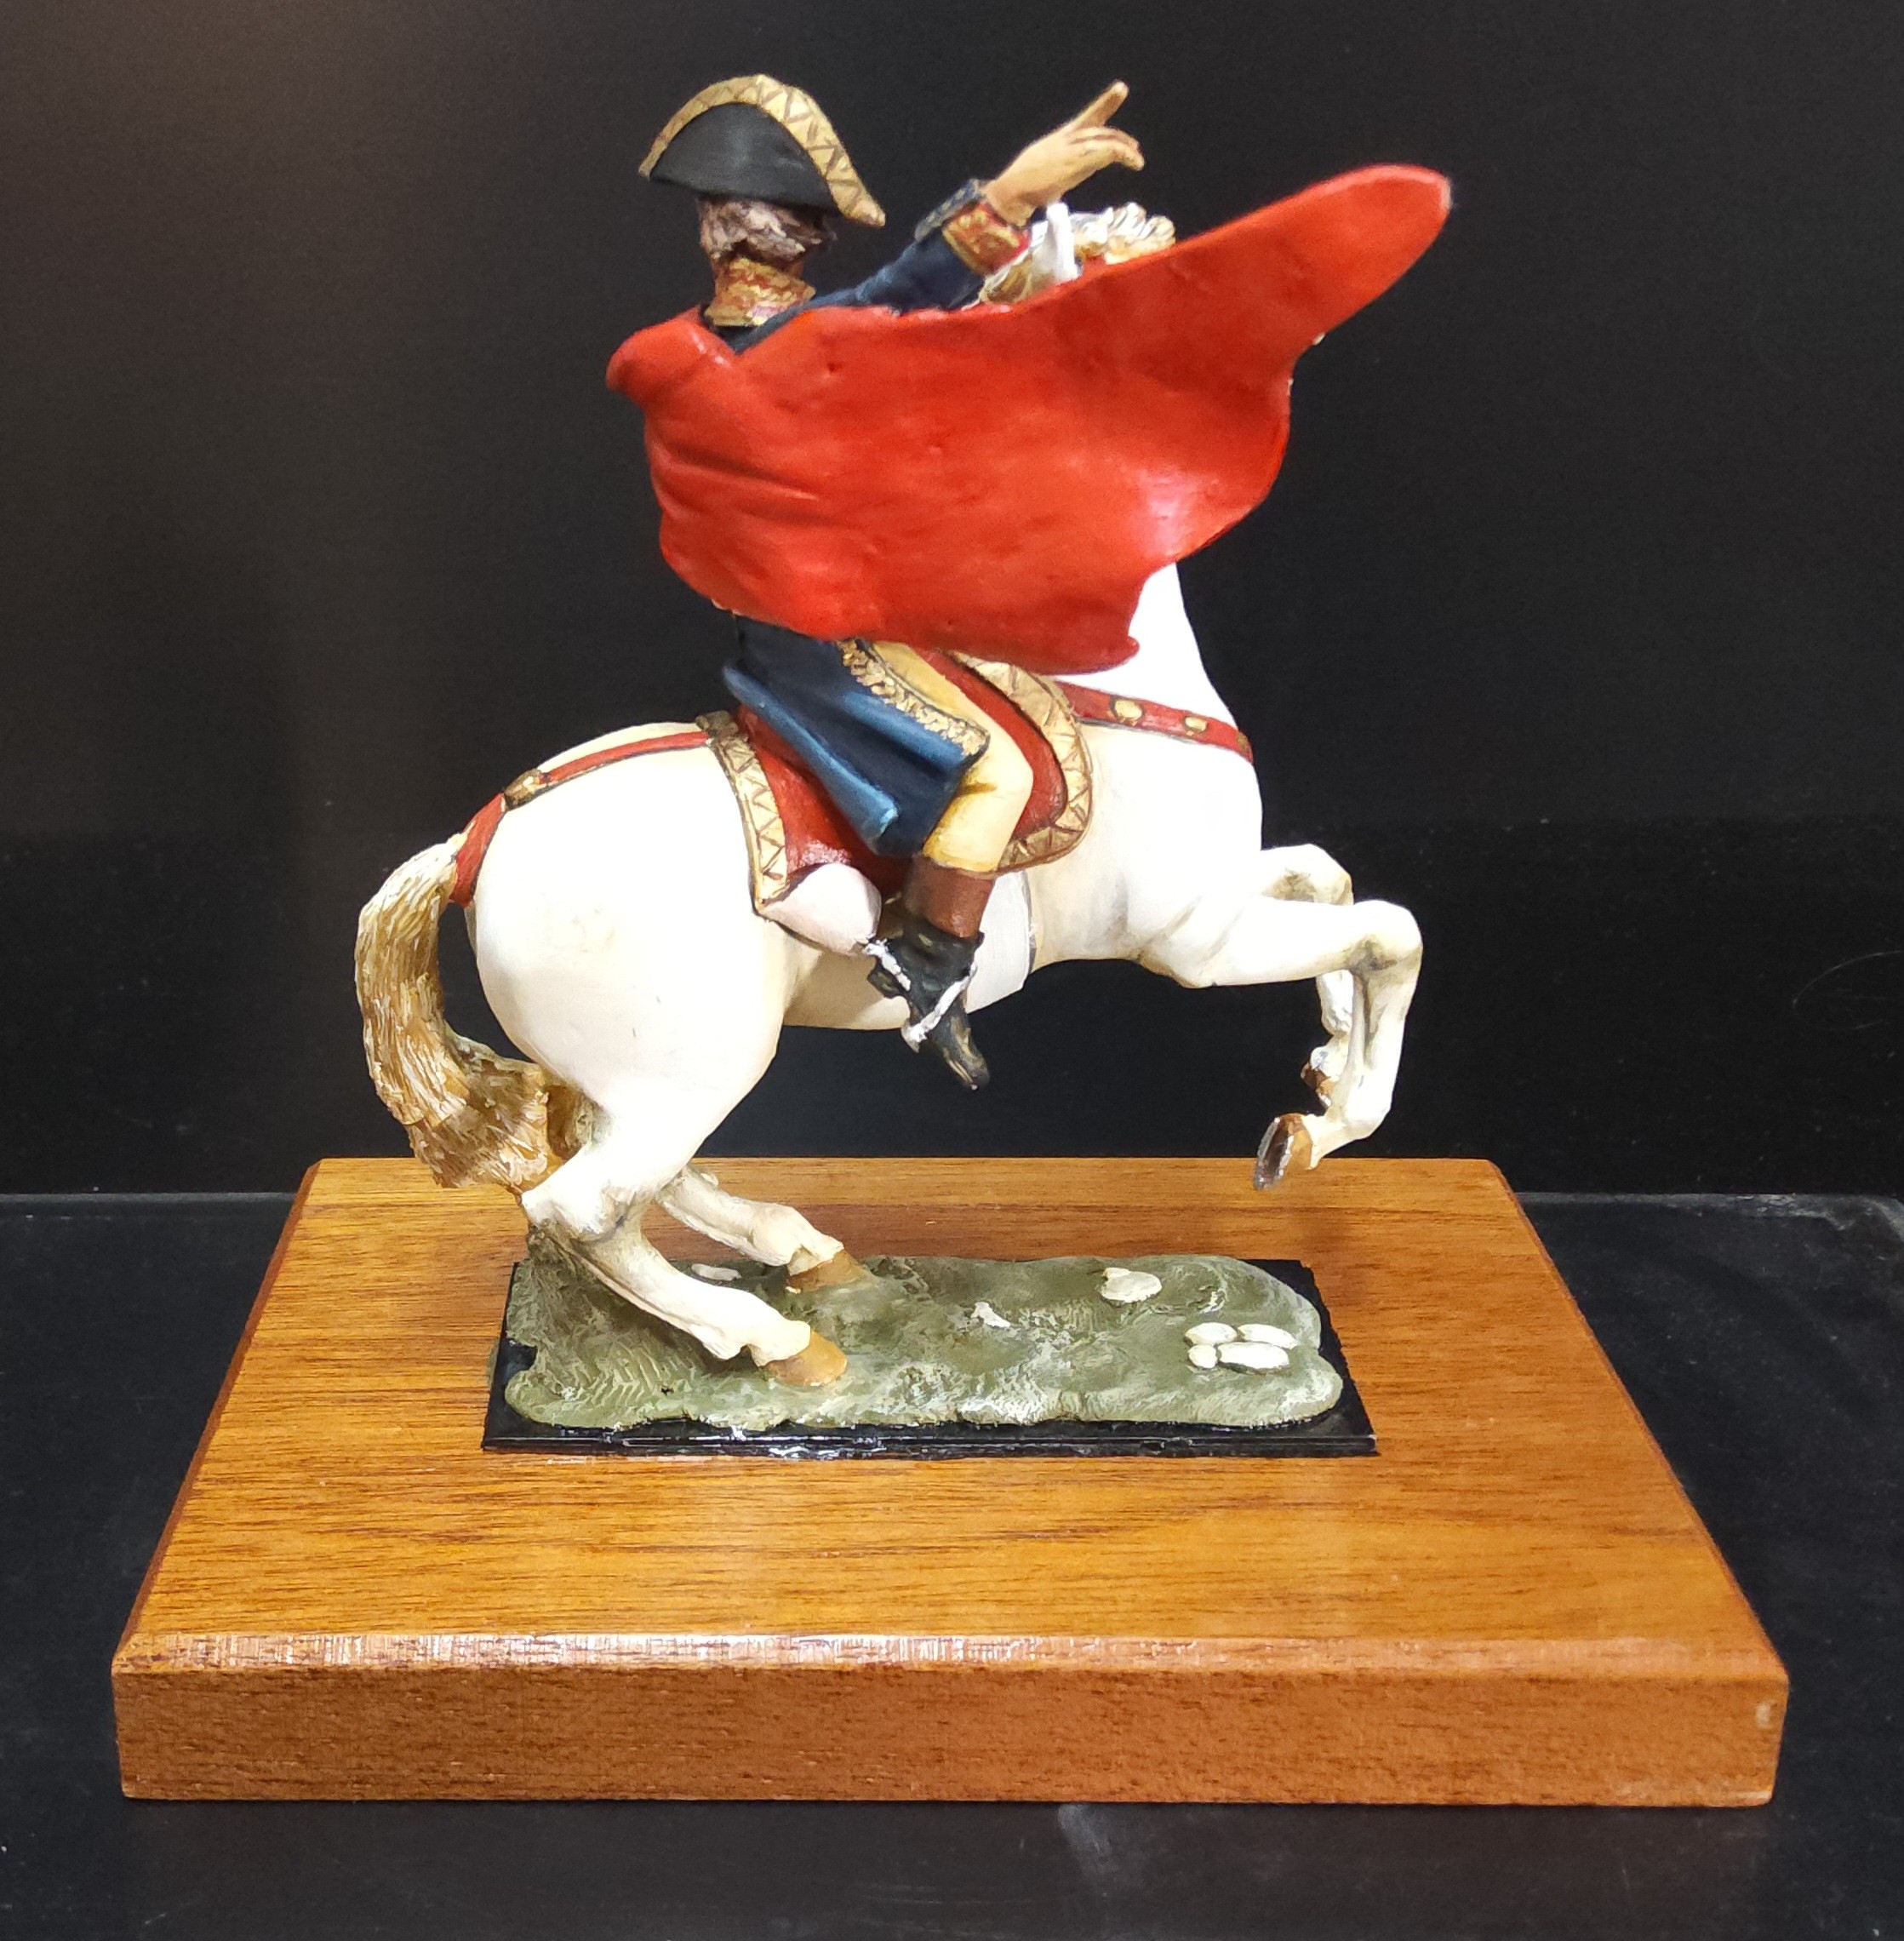 A handpainted die-cast figure of Napoleon on horseback based on the painting by Jacques-Louis David, - Image 2 of 3